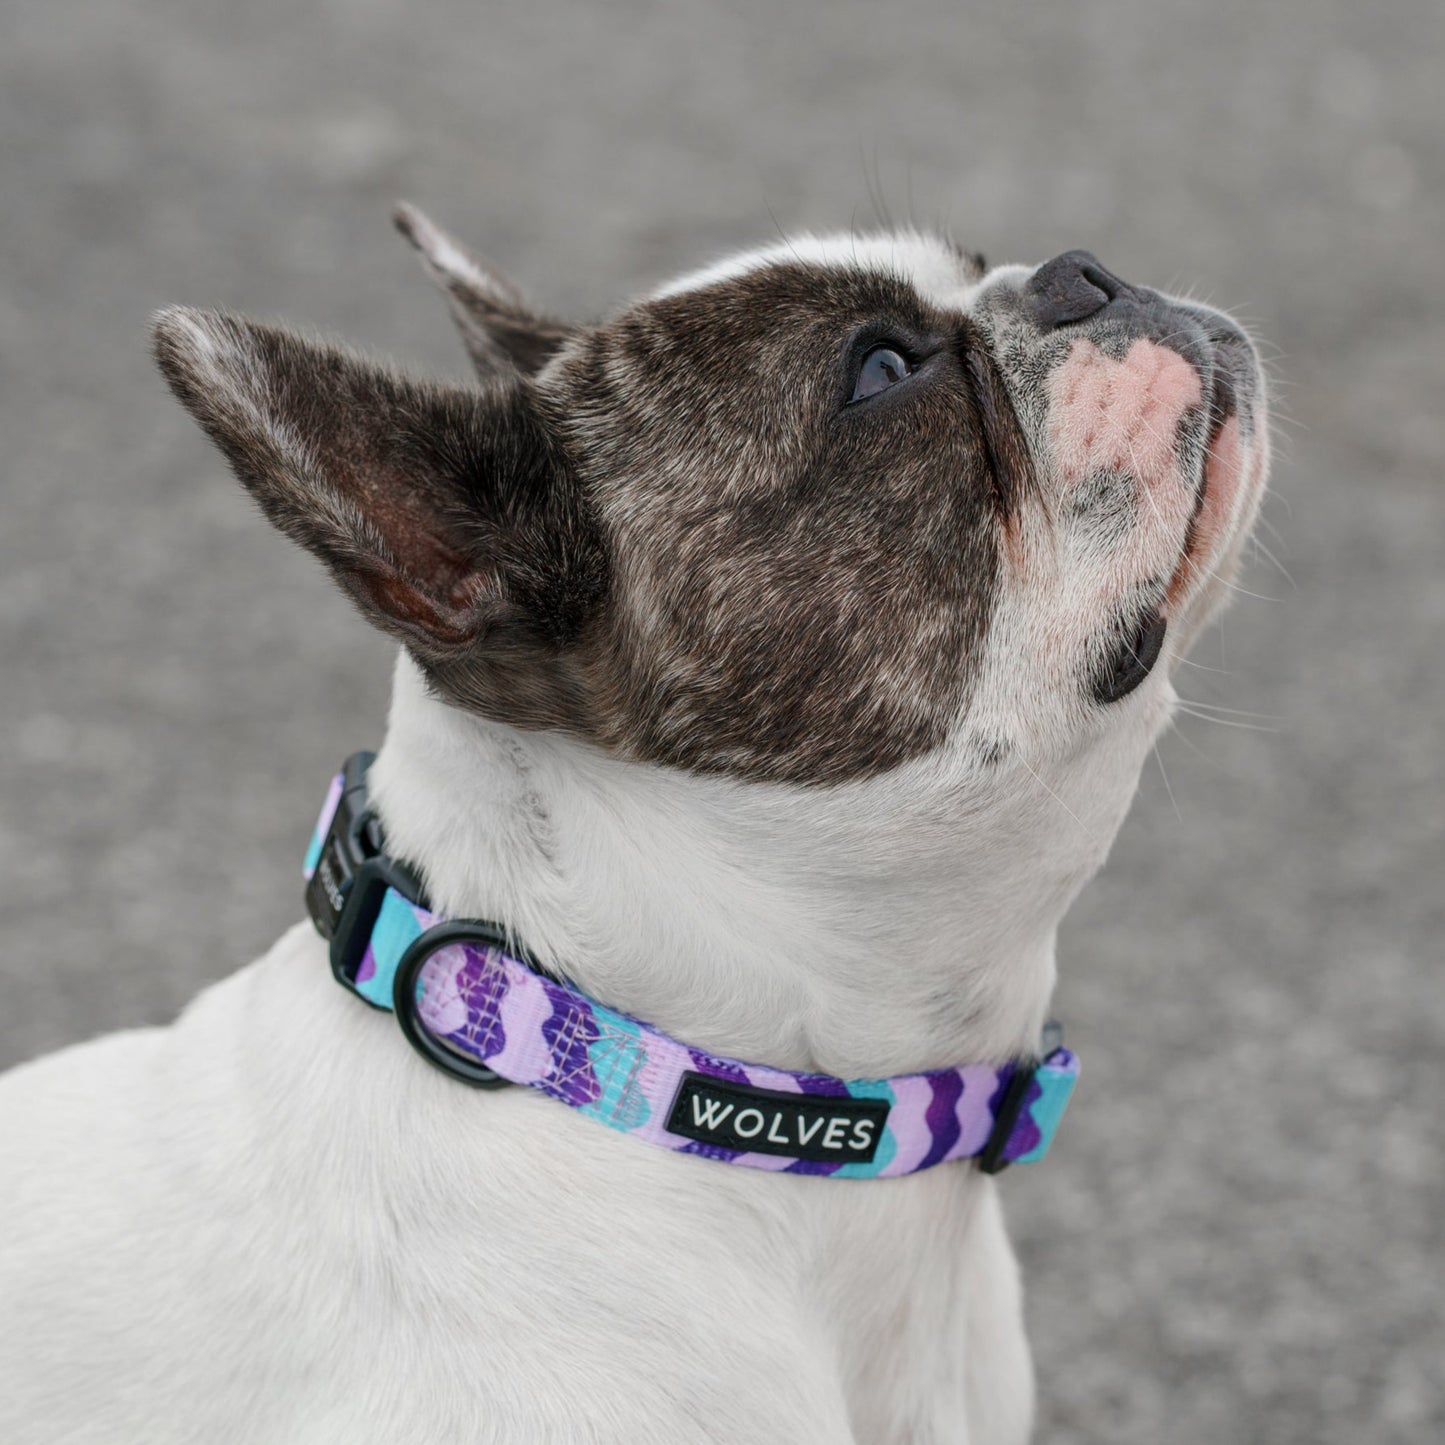 Dog wearing Purple & blue wave patterned dog collar with "Wolves" logo.